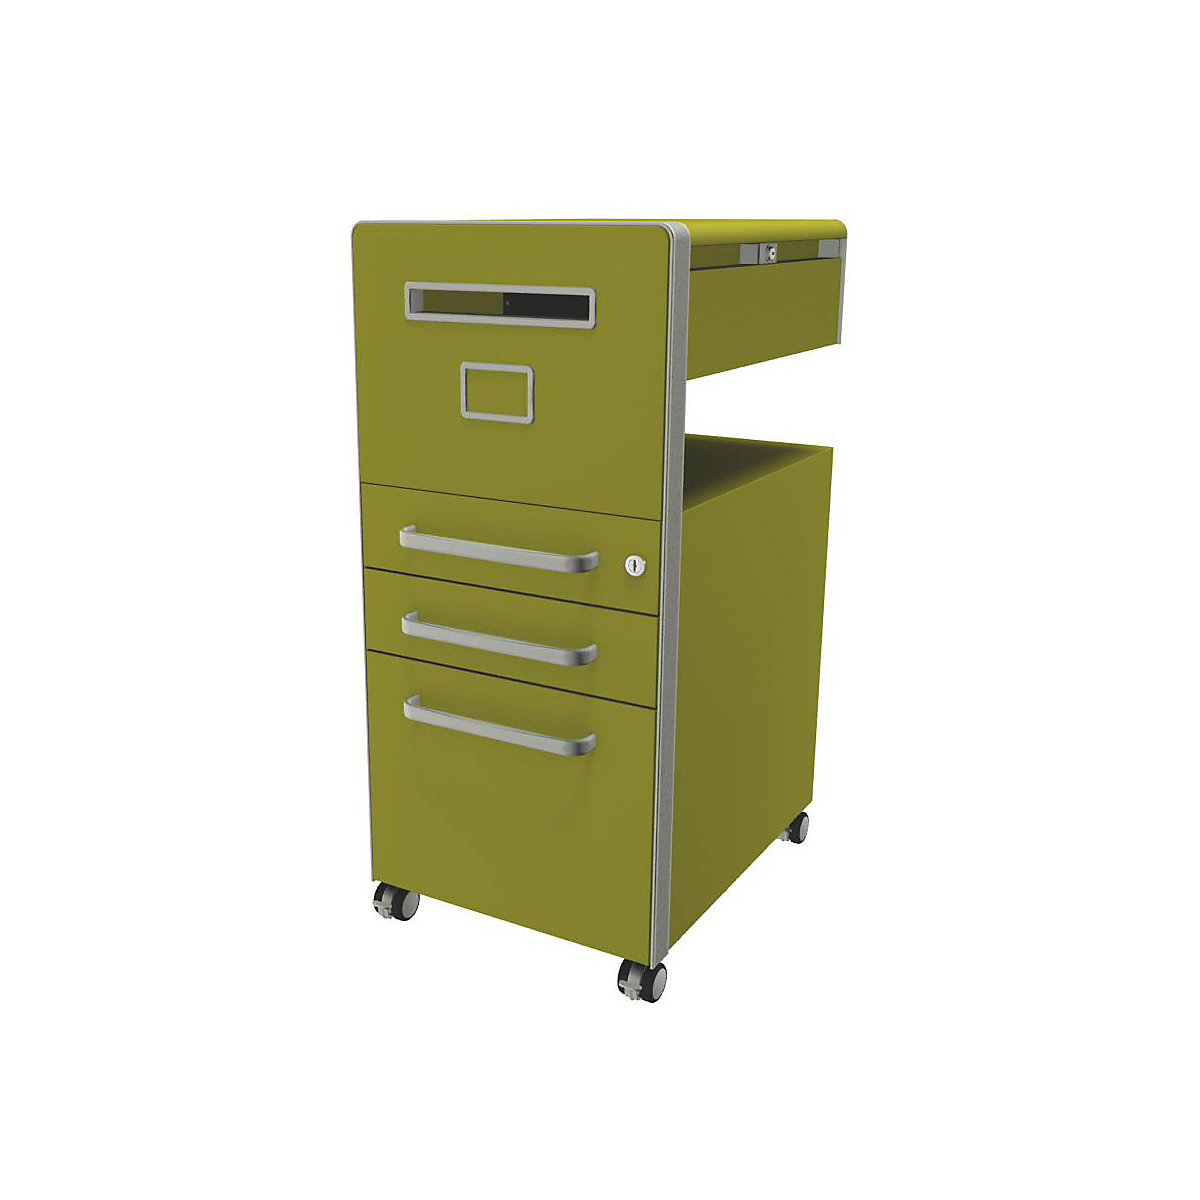 Bite™ pedestal furniture, with 1 whiteboard, opens on the left side – BISLEY, with 2 universal drawers, 1 suspension file drawer, tickleweed-14